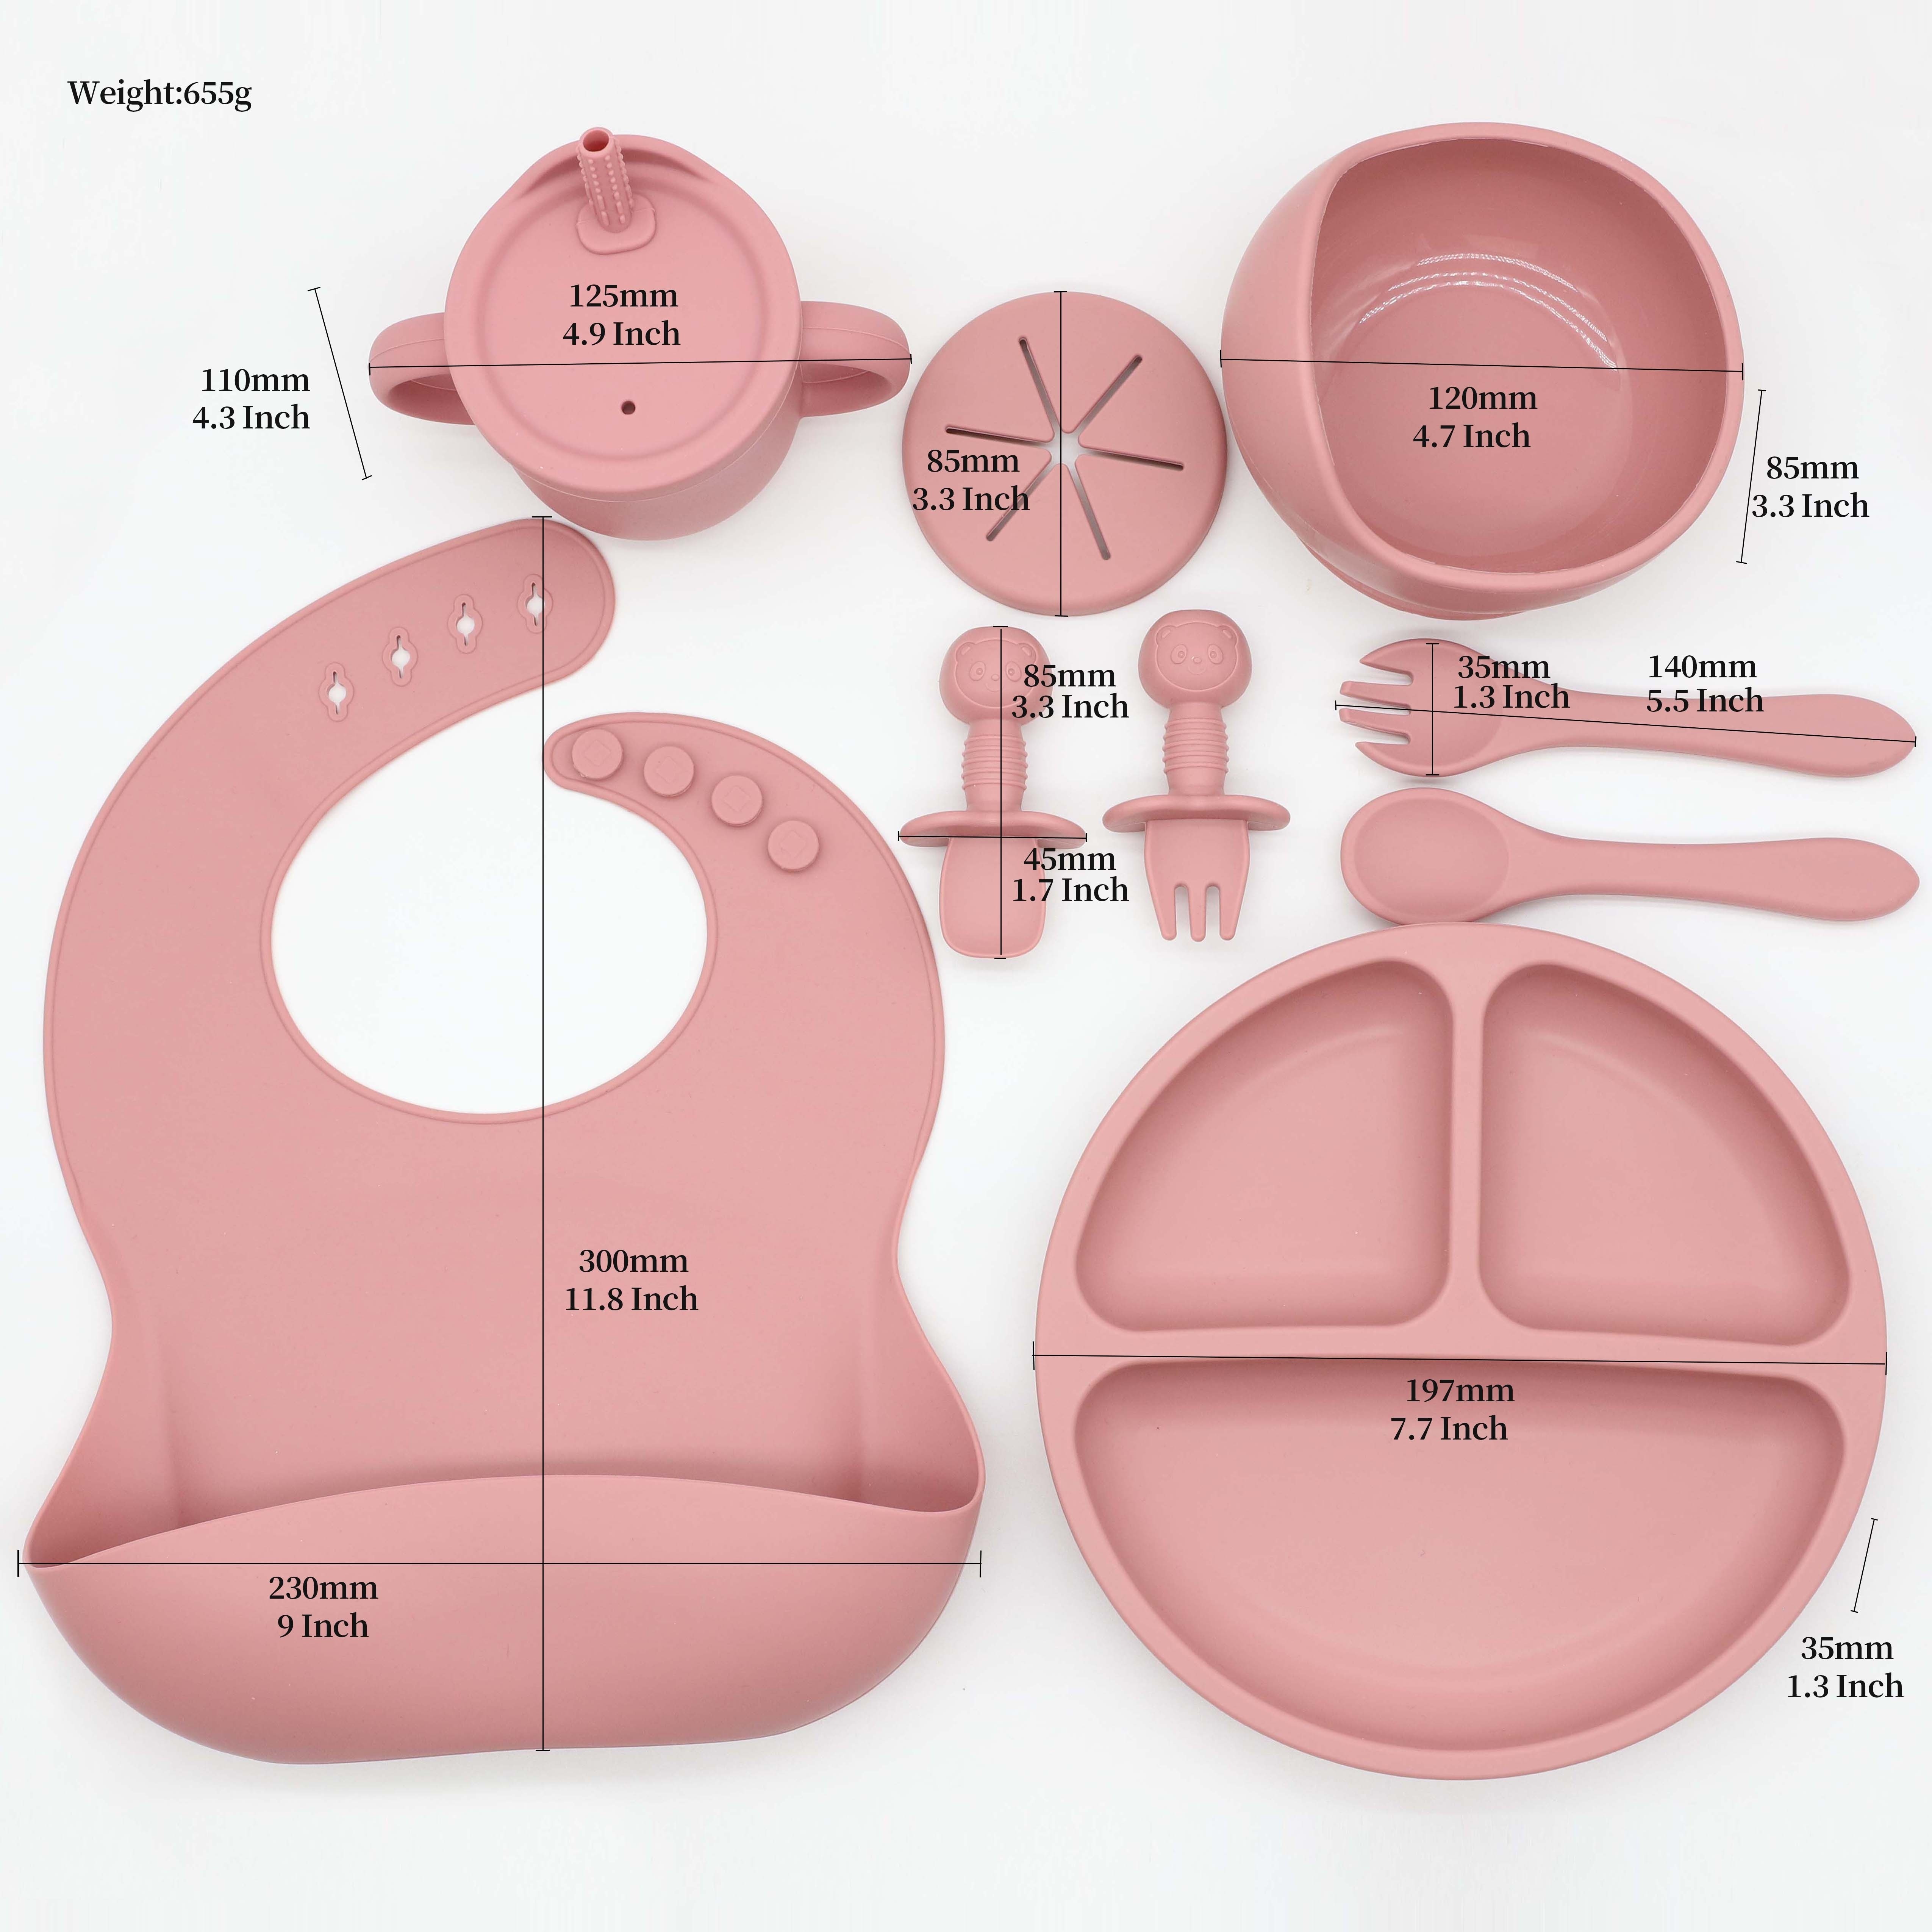 Silicone Baby Feeding Set, Baby Led Weaning Supplies with Suction Bowl  Divided Plate, Toddler Self Feeding Dish Set with Spoons Forks Sippy Cup